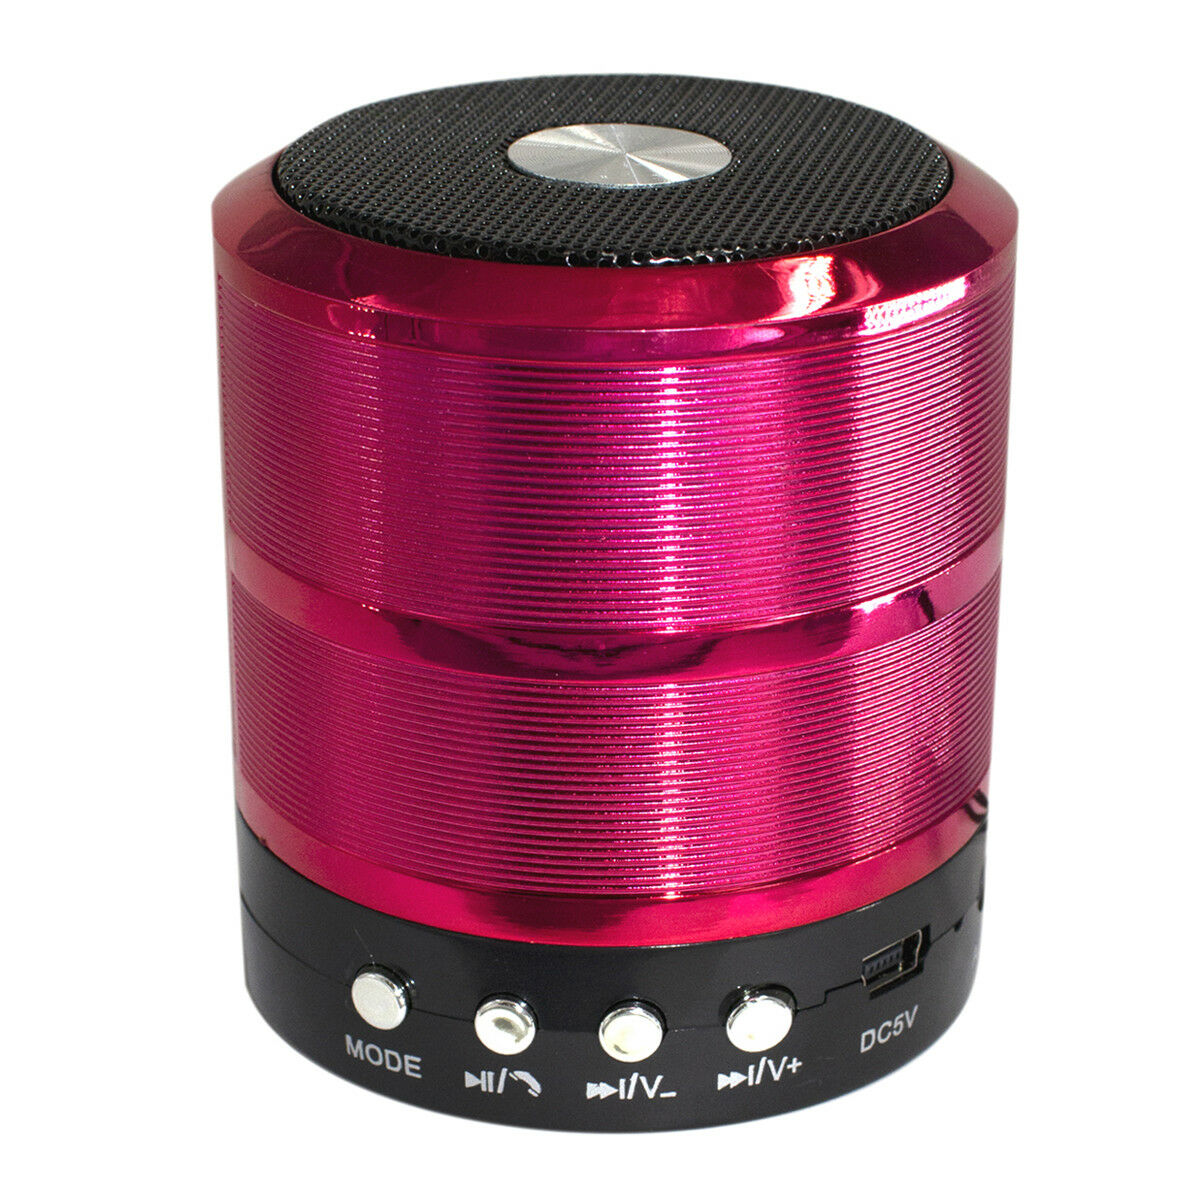 Mini Portable Bluetooth Wireless Speaker Super Bass for iPhone Samsung  red